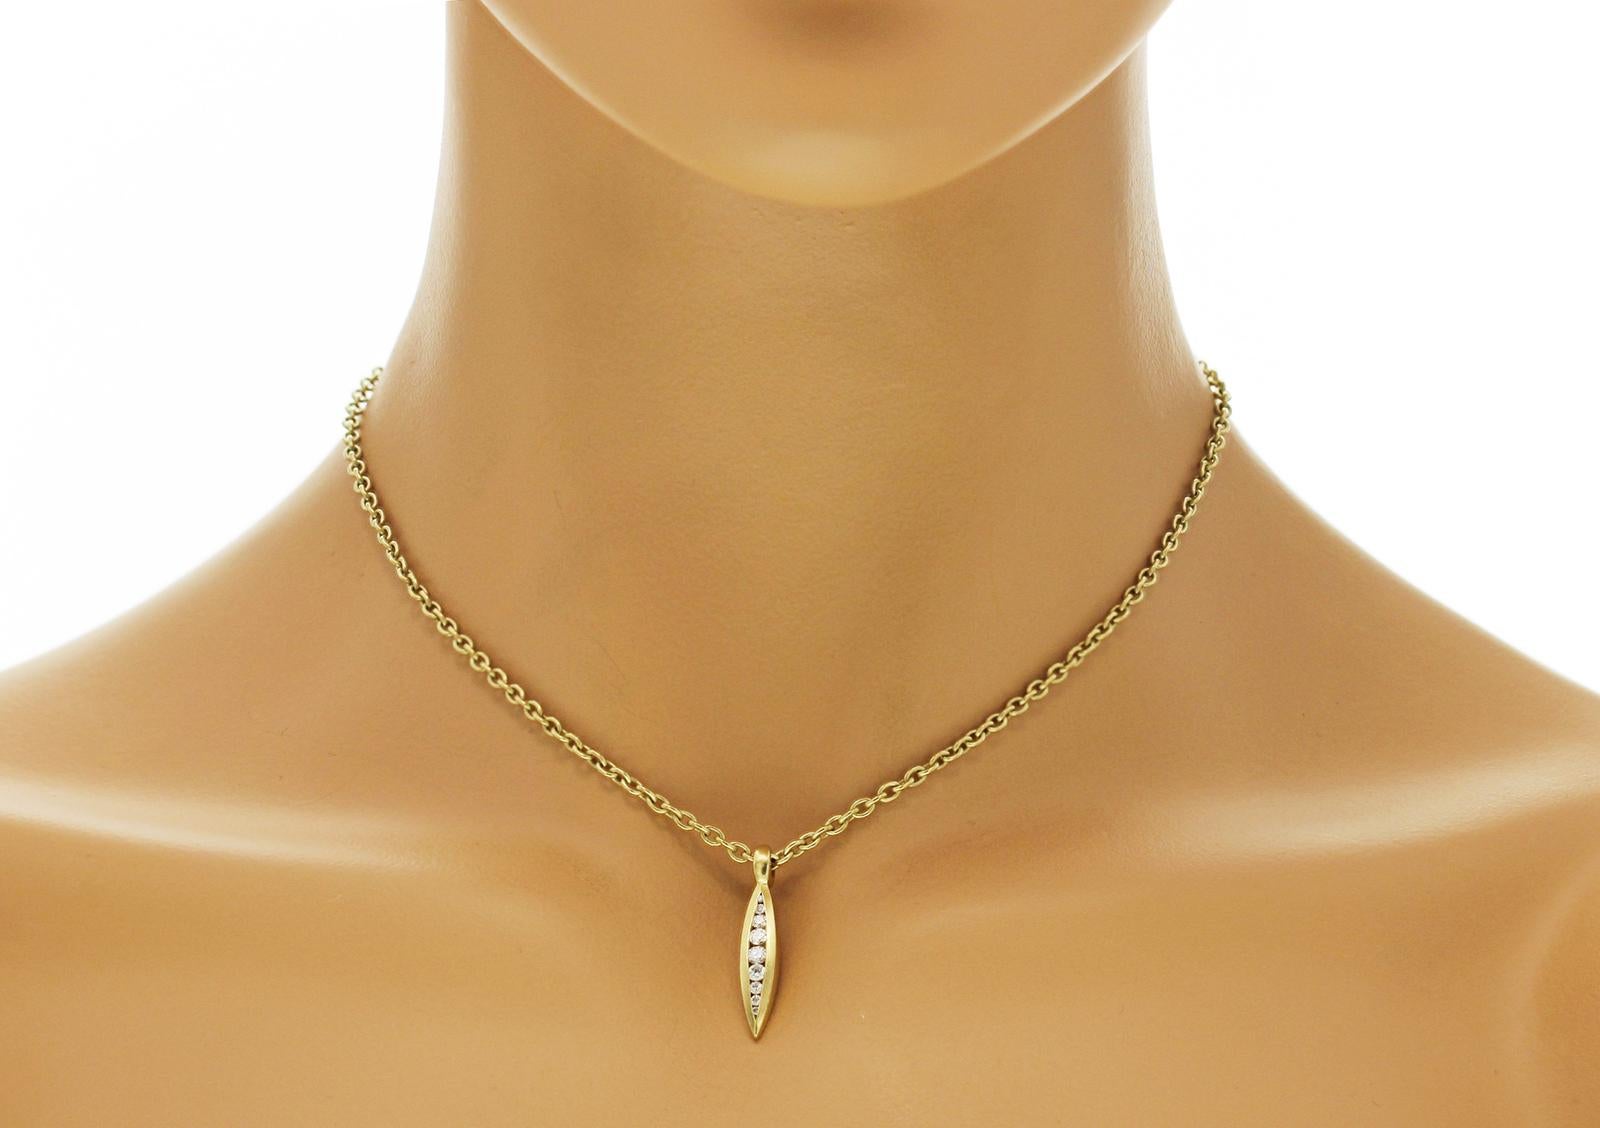 100% Authentic, 100% Customer Satisfaction 

Width: 1.8 mm

Pendant: 28 mm

Size: 16 Inches 

Metal: 18K Yellow Gold

Hallmarks: E Rand 750

Total Weight: 14.3 Grams

Stone Type: Diamond 

Condition: Preowned

Estimated Price: $6500

Stock Number: